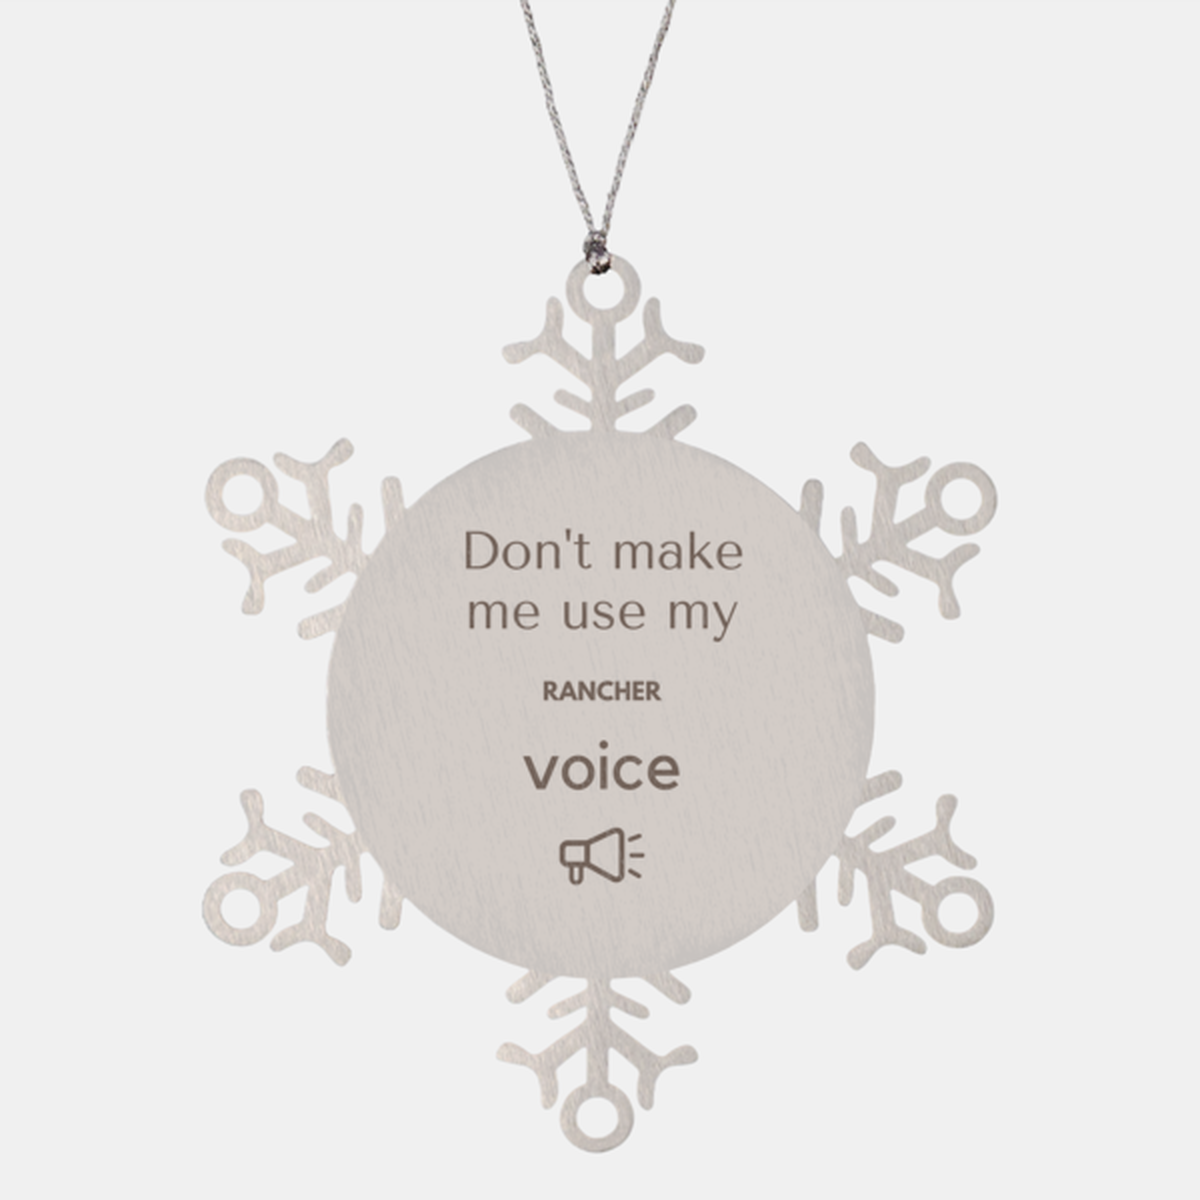 Don't make me use my Rancher voice, Sarcasm Rancher Ornament Gifts, Christmas Rancher Snowflake Ornament Unique Gifts For Rancher Coworkers, Men, Women, Colleague, Friends